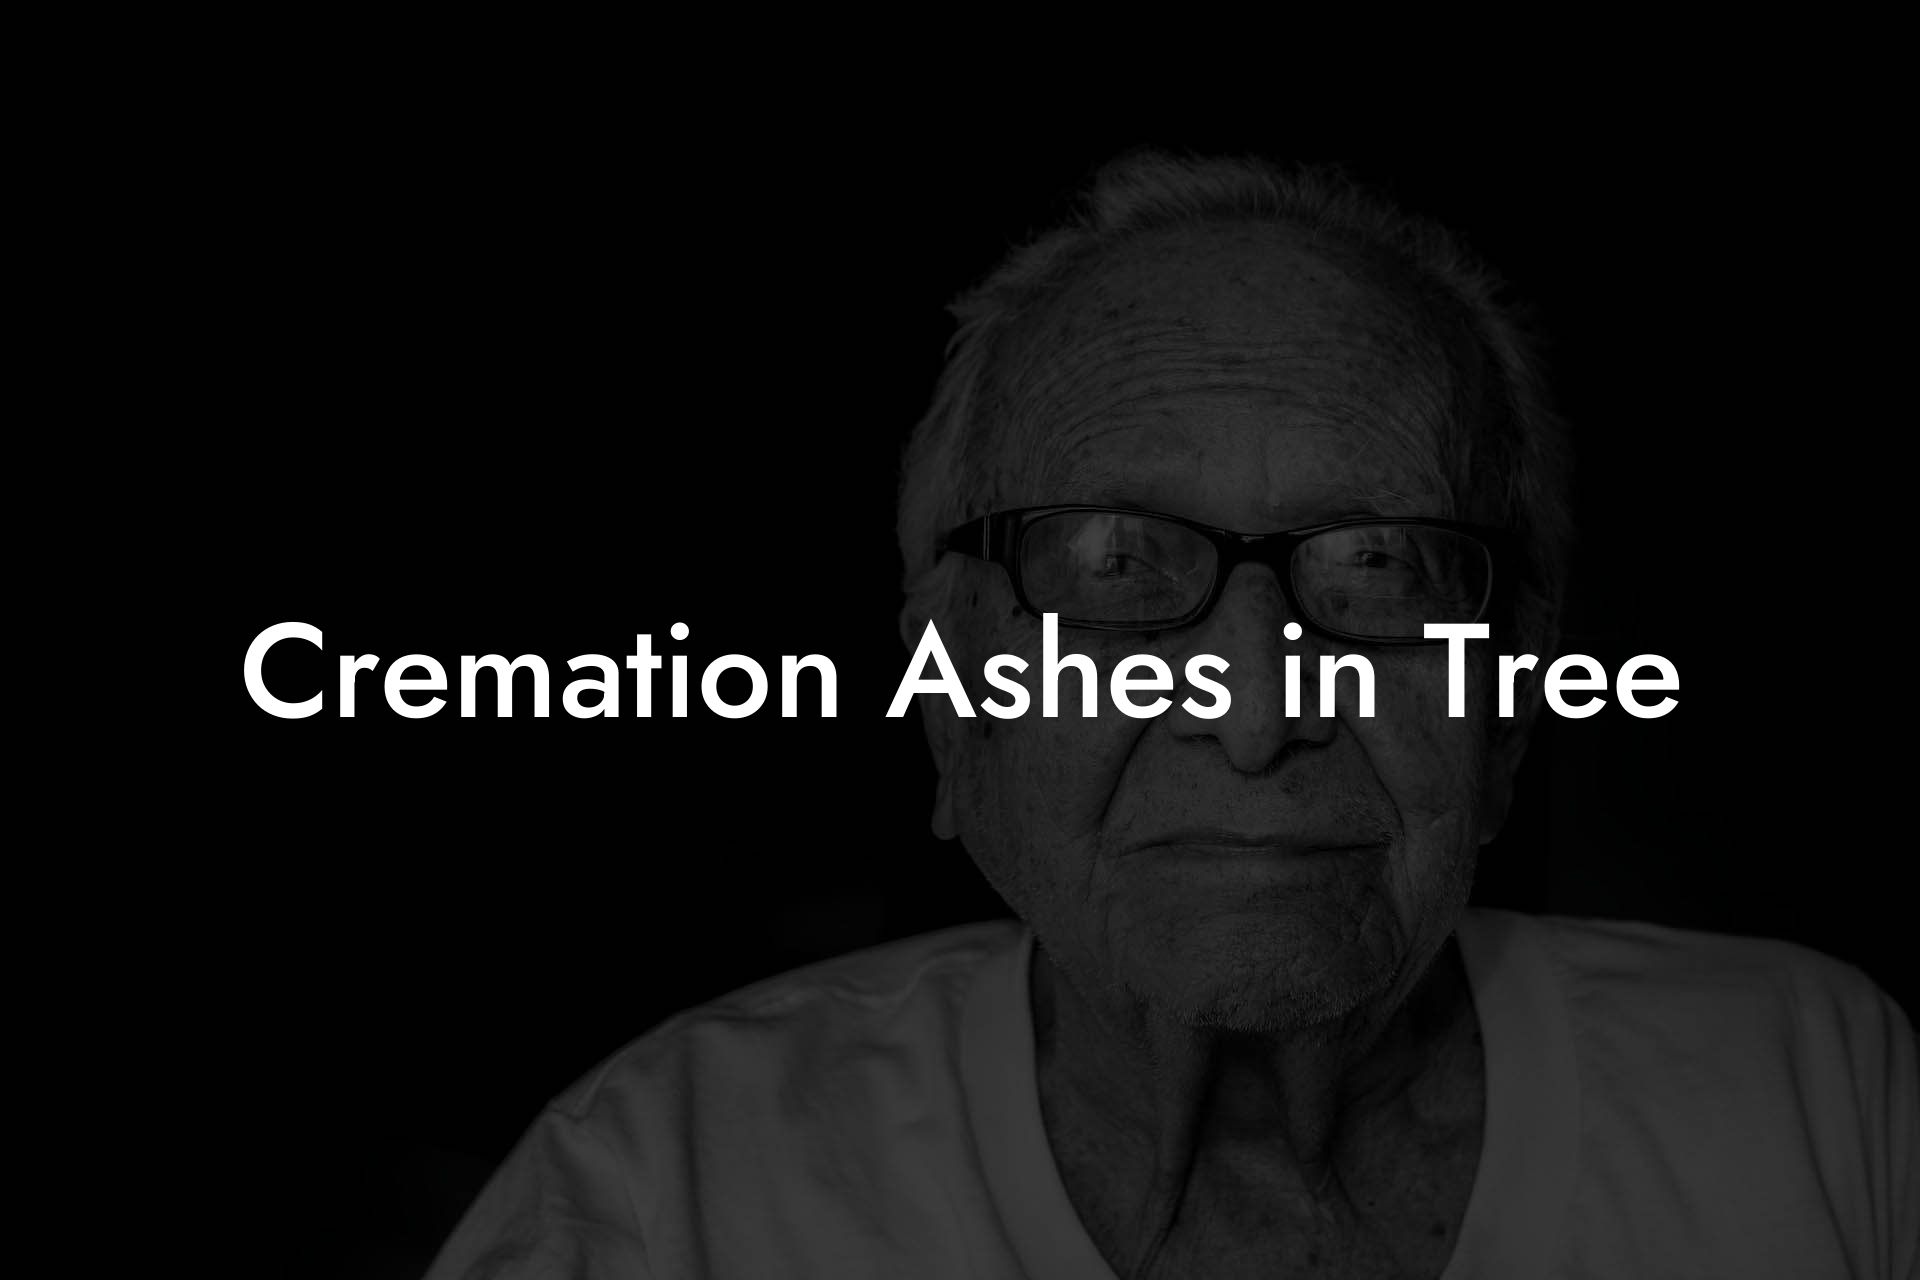 Cremation Ashes in Tree